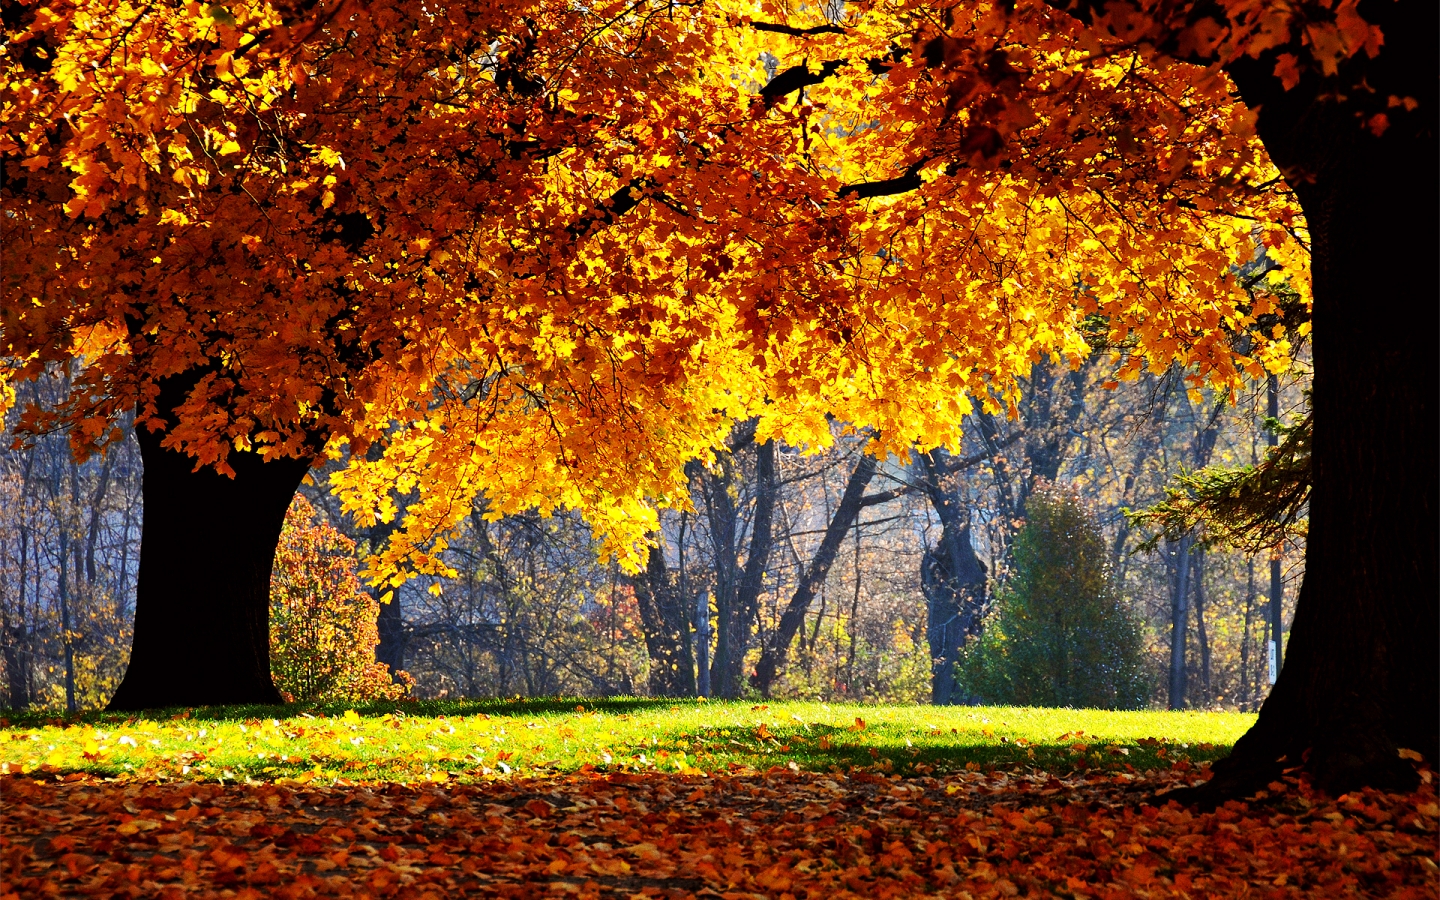 Autumn colors over trees for 1440 x 900 widescreen resolution